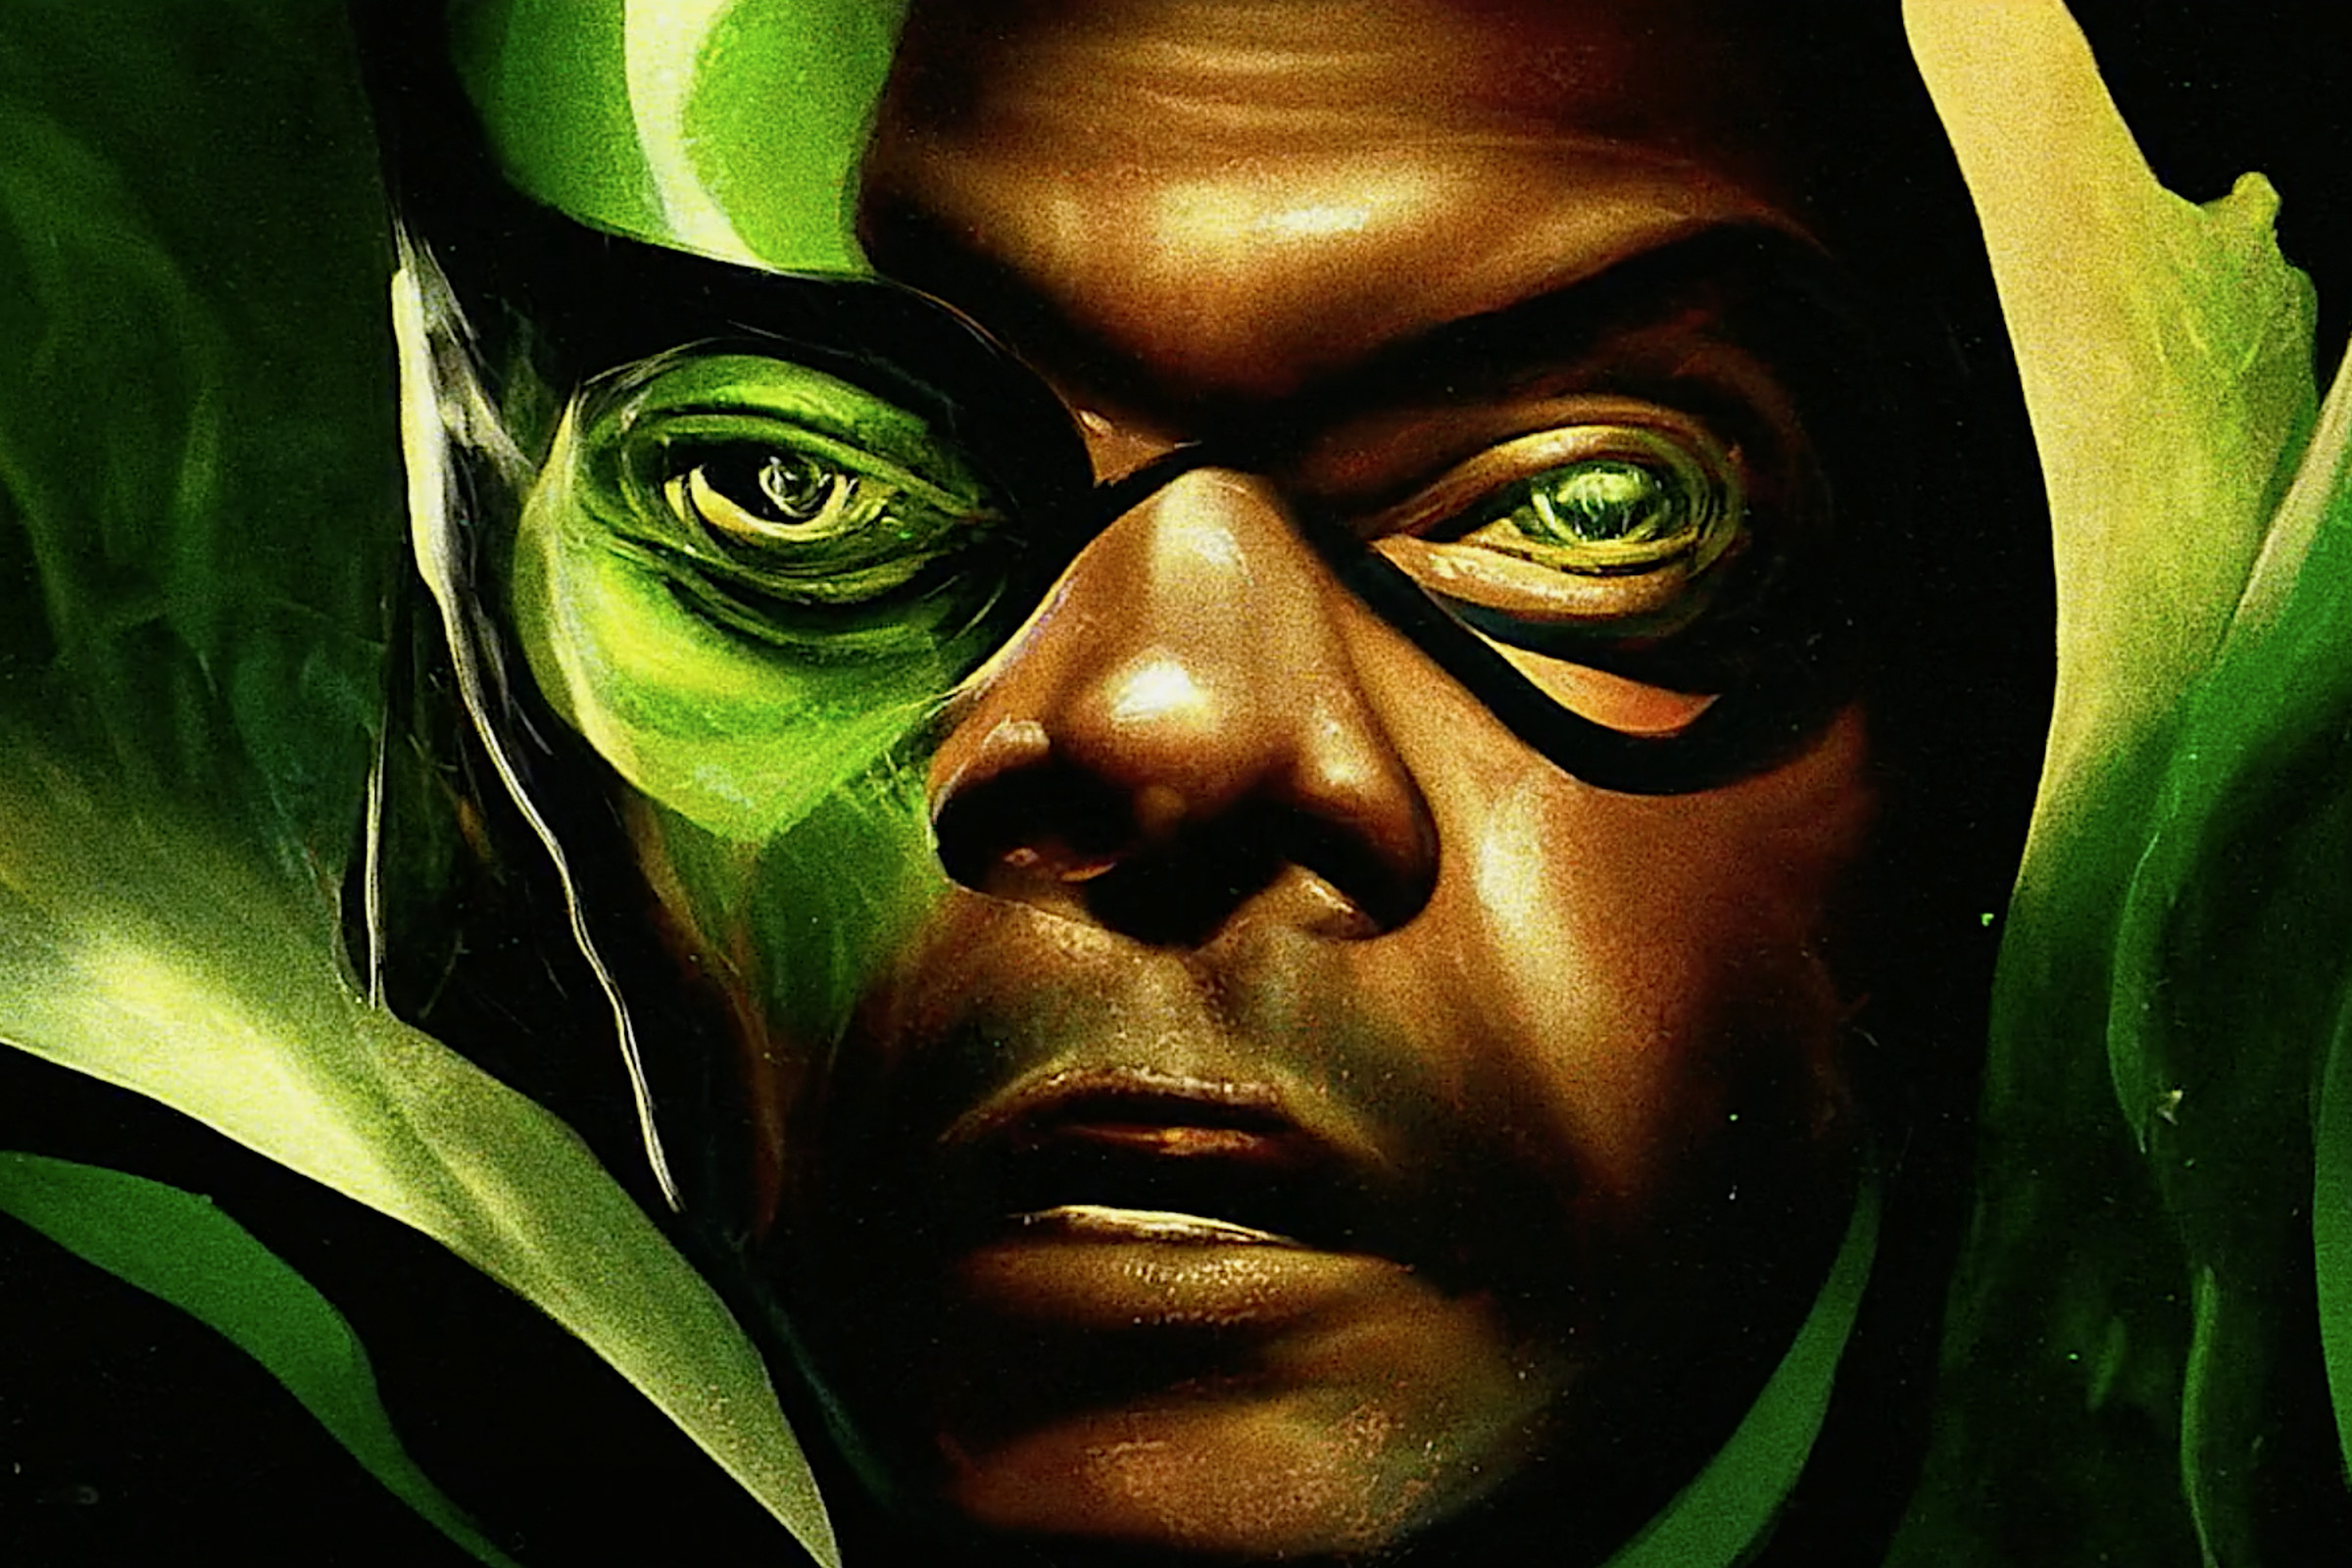 A tight shot of a man’s face, which seems to be morphing into a green, reptilian version of itself. The man’s face is flanked by glowing green streaks, and the entire image is digitally-generated and made to look like an oil painting.